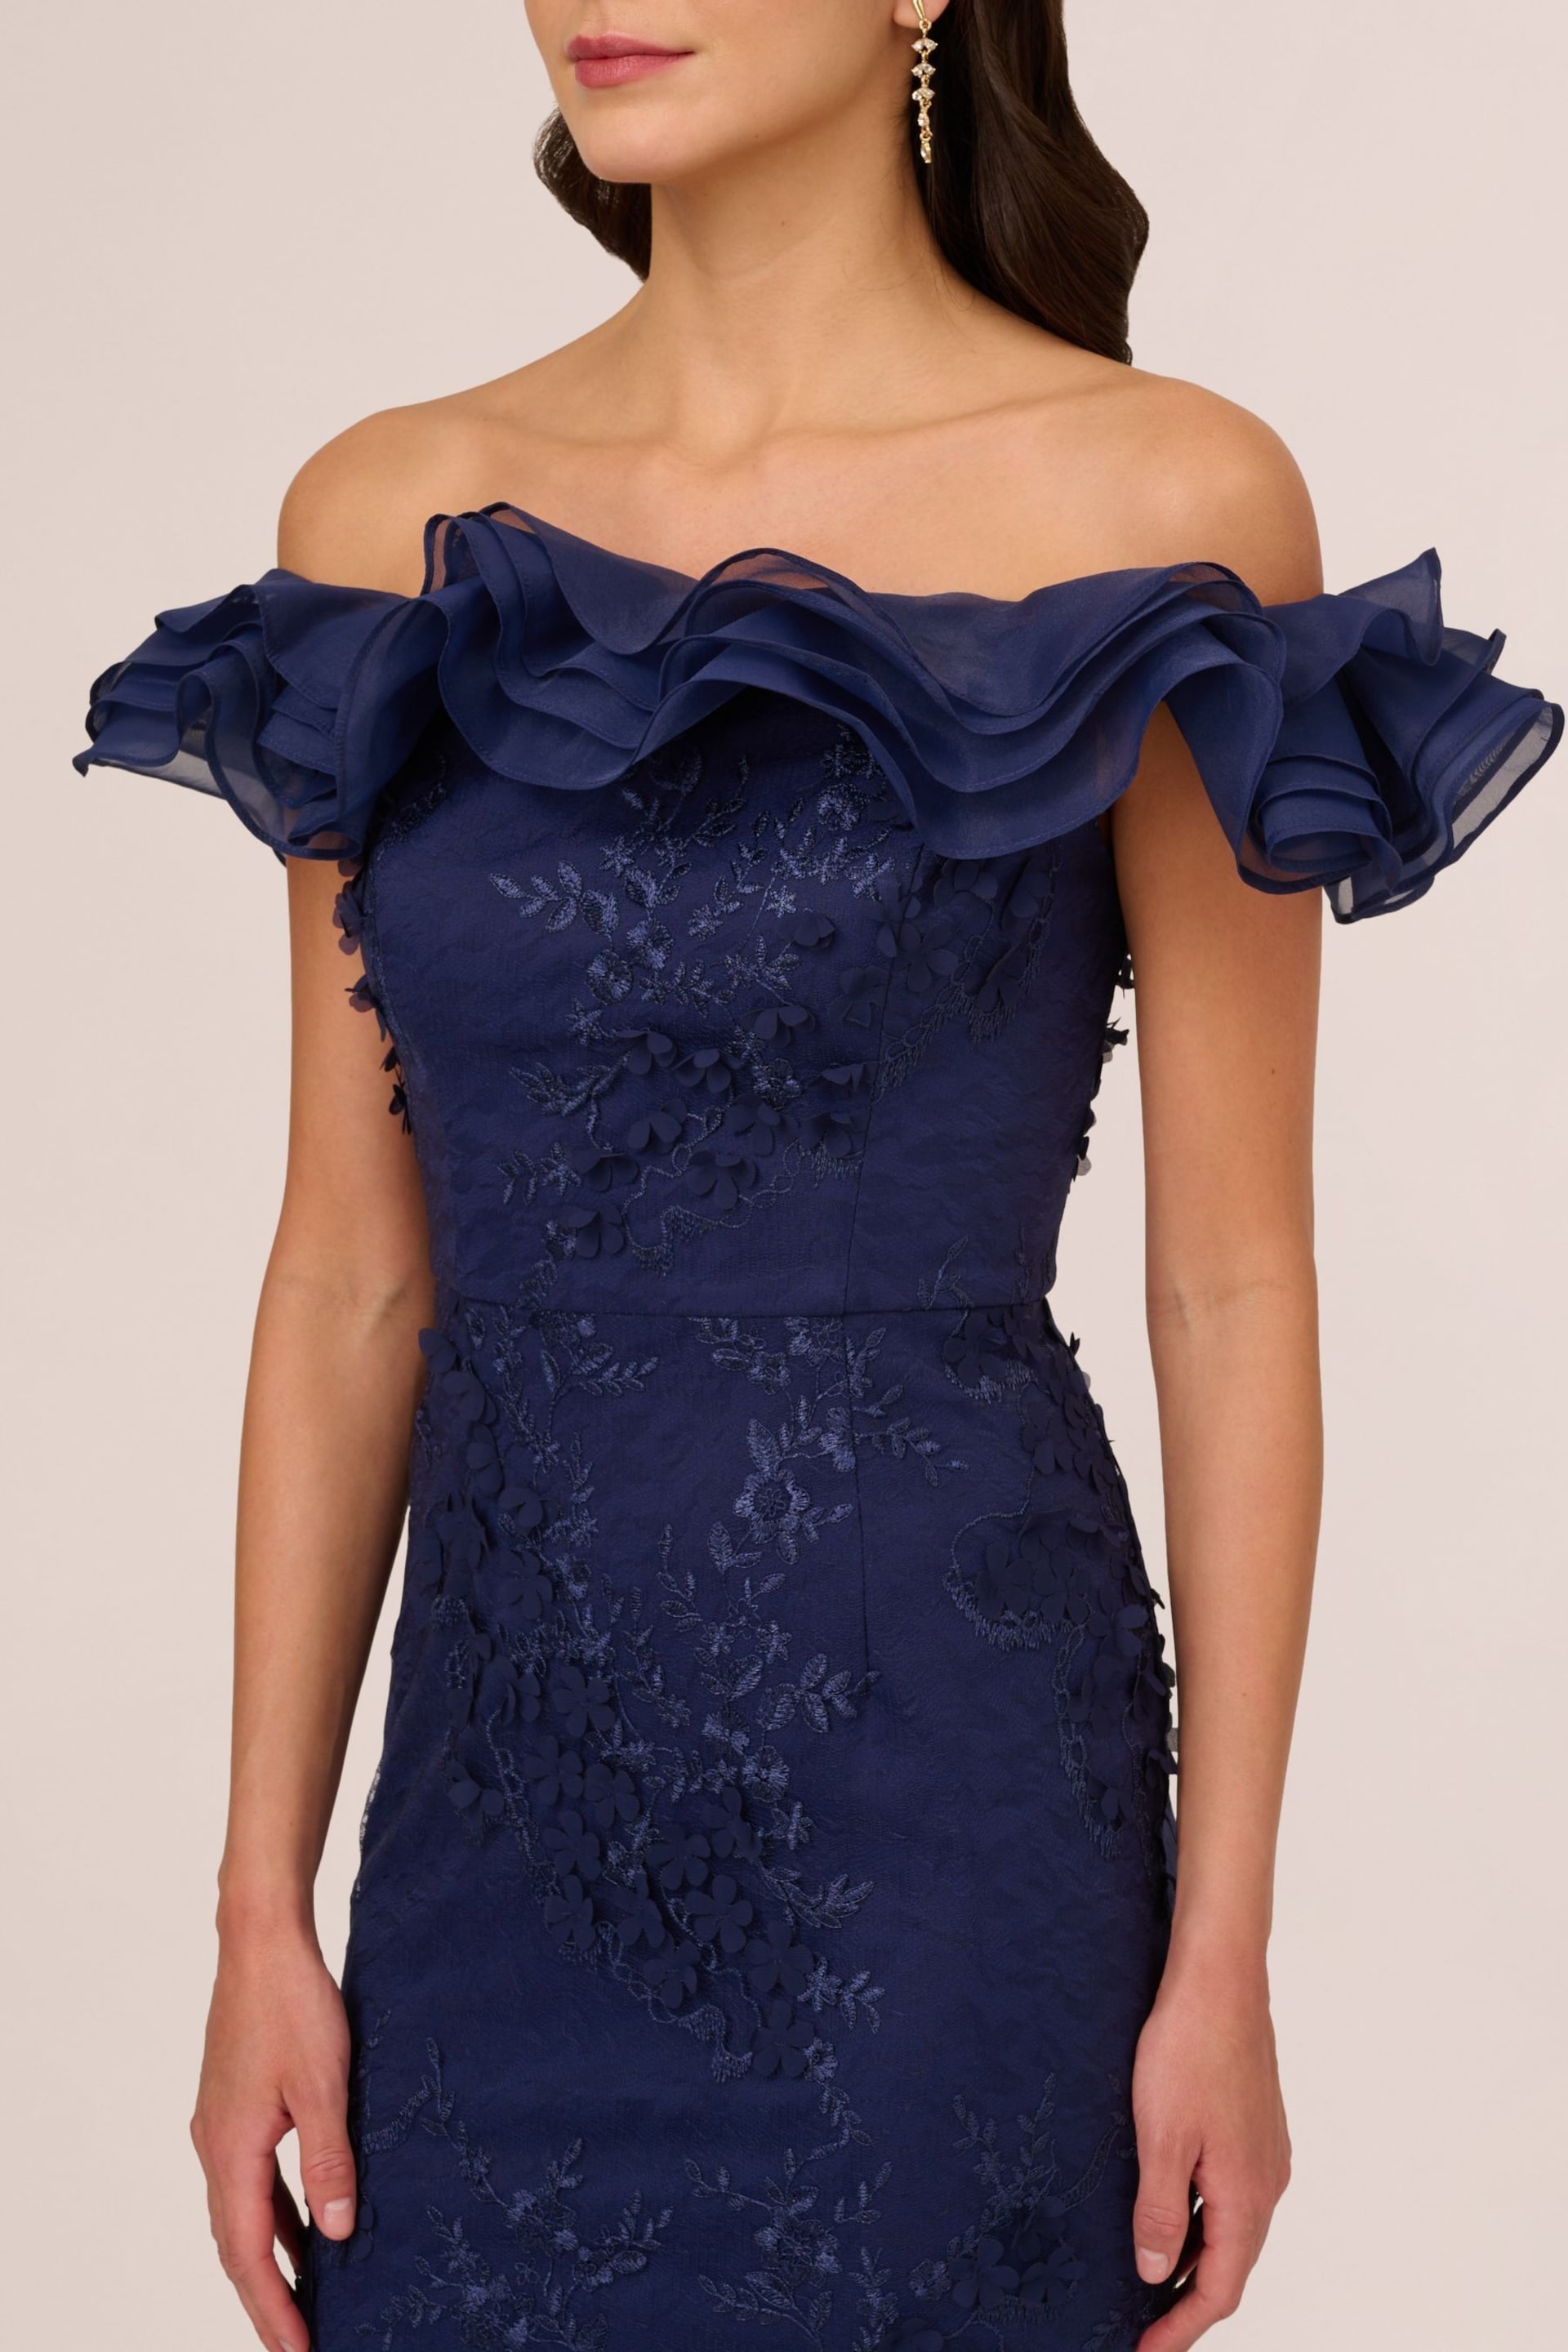 Adrianna Papell Blue Floral Ruffle Gown - Image 4 of 7